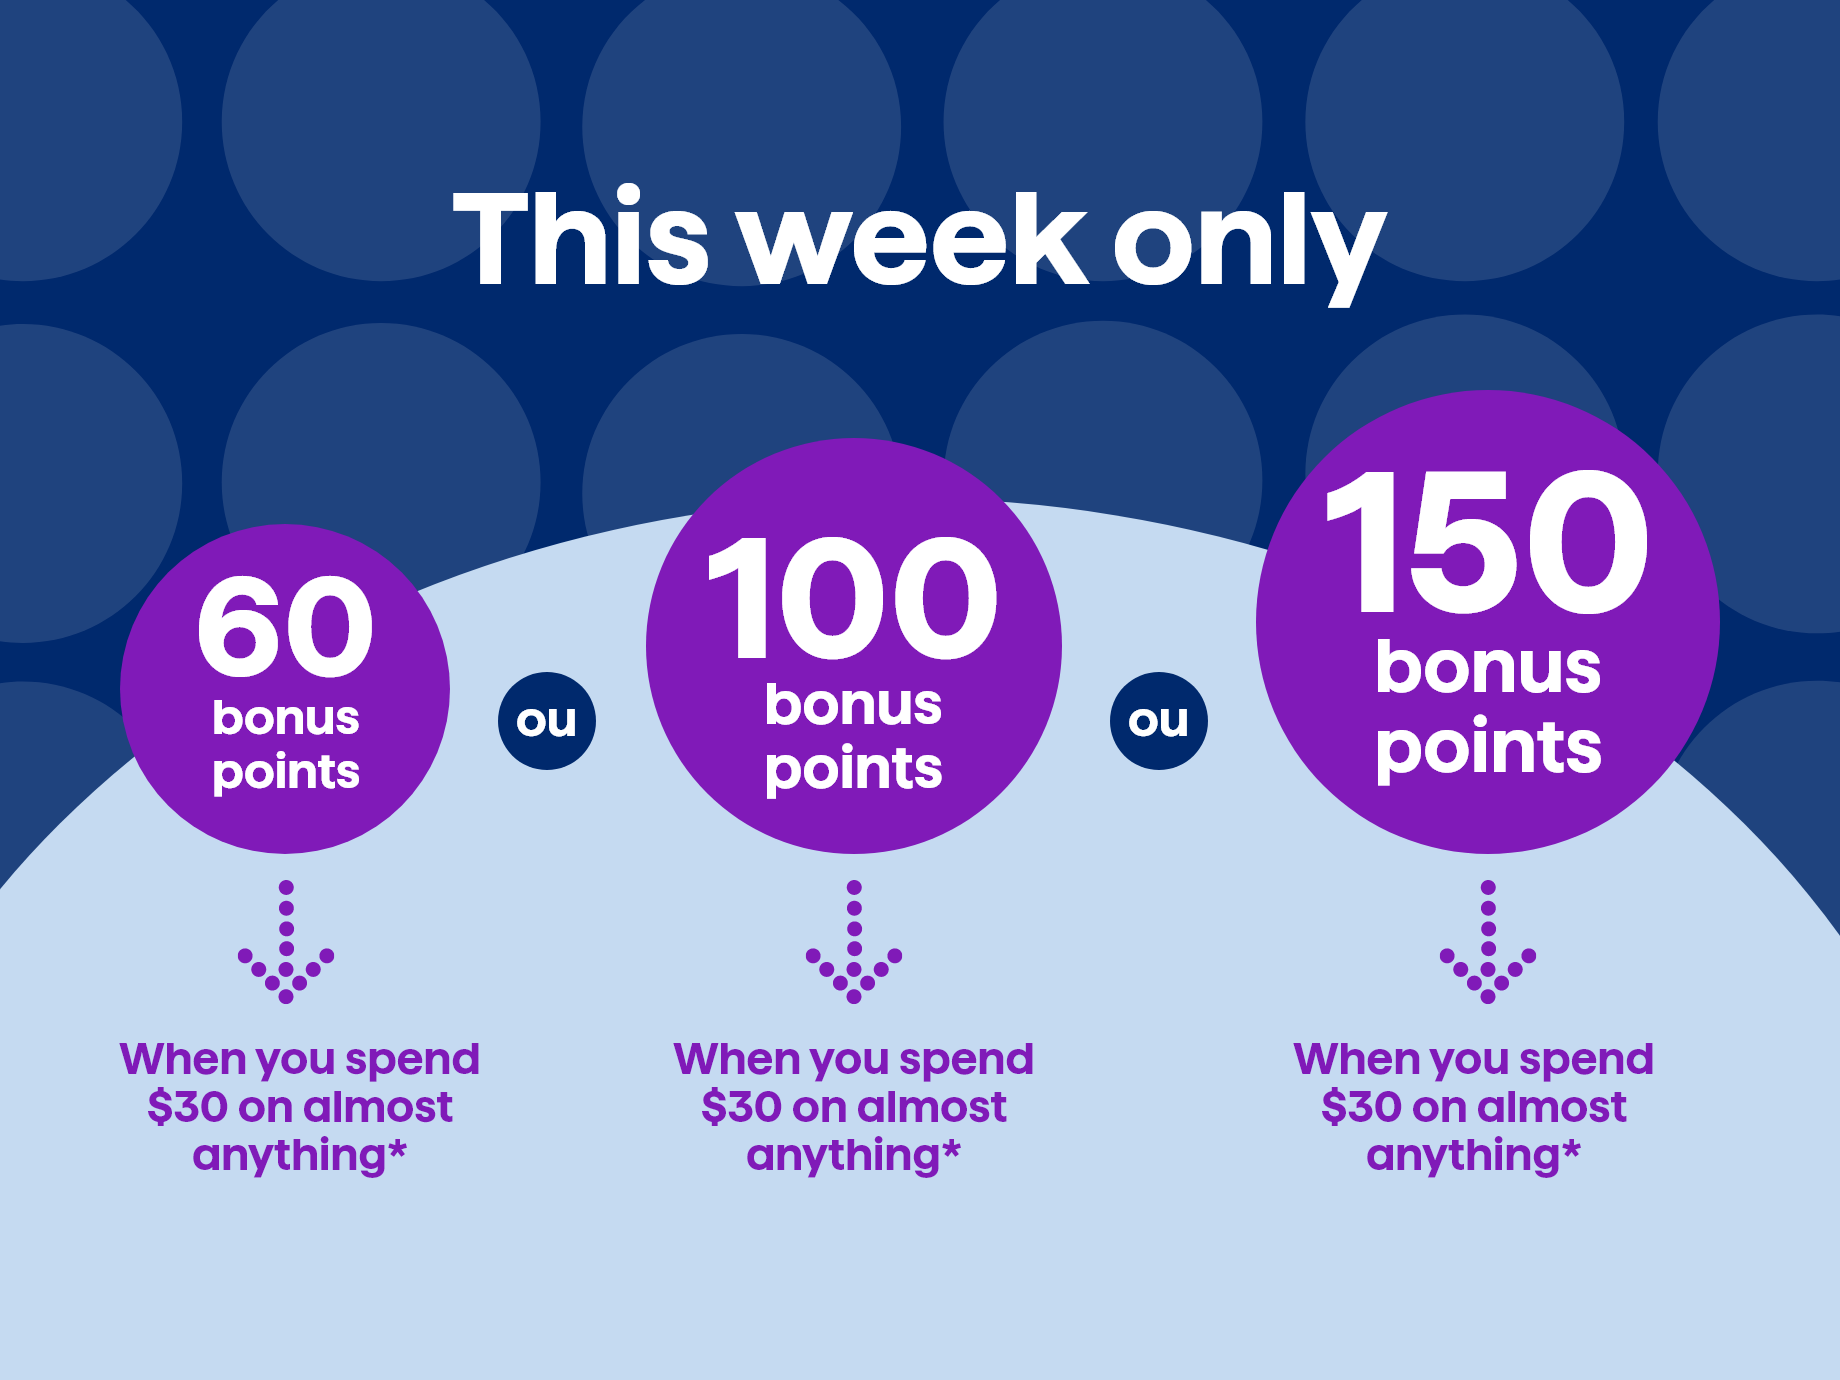 60 bonus points when you spend 30$ on almost everything
or
100 bonus points when you spend 40$ on almost everything
or
150 bonus points when you spend 50$ on almost everything